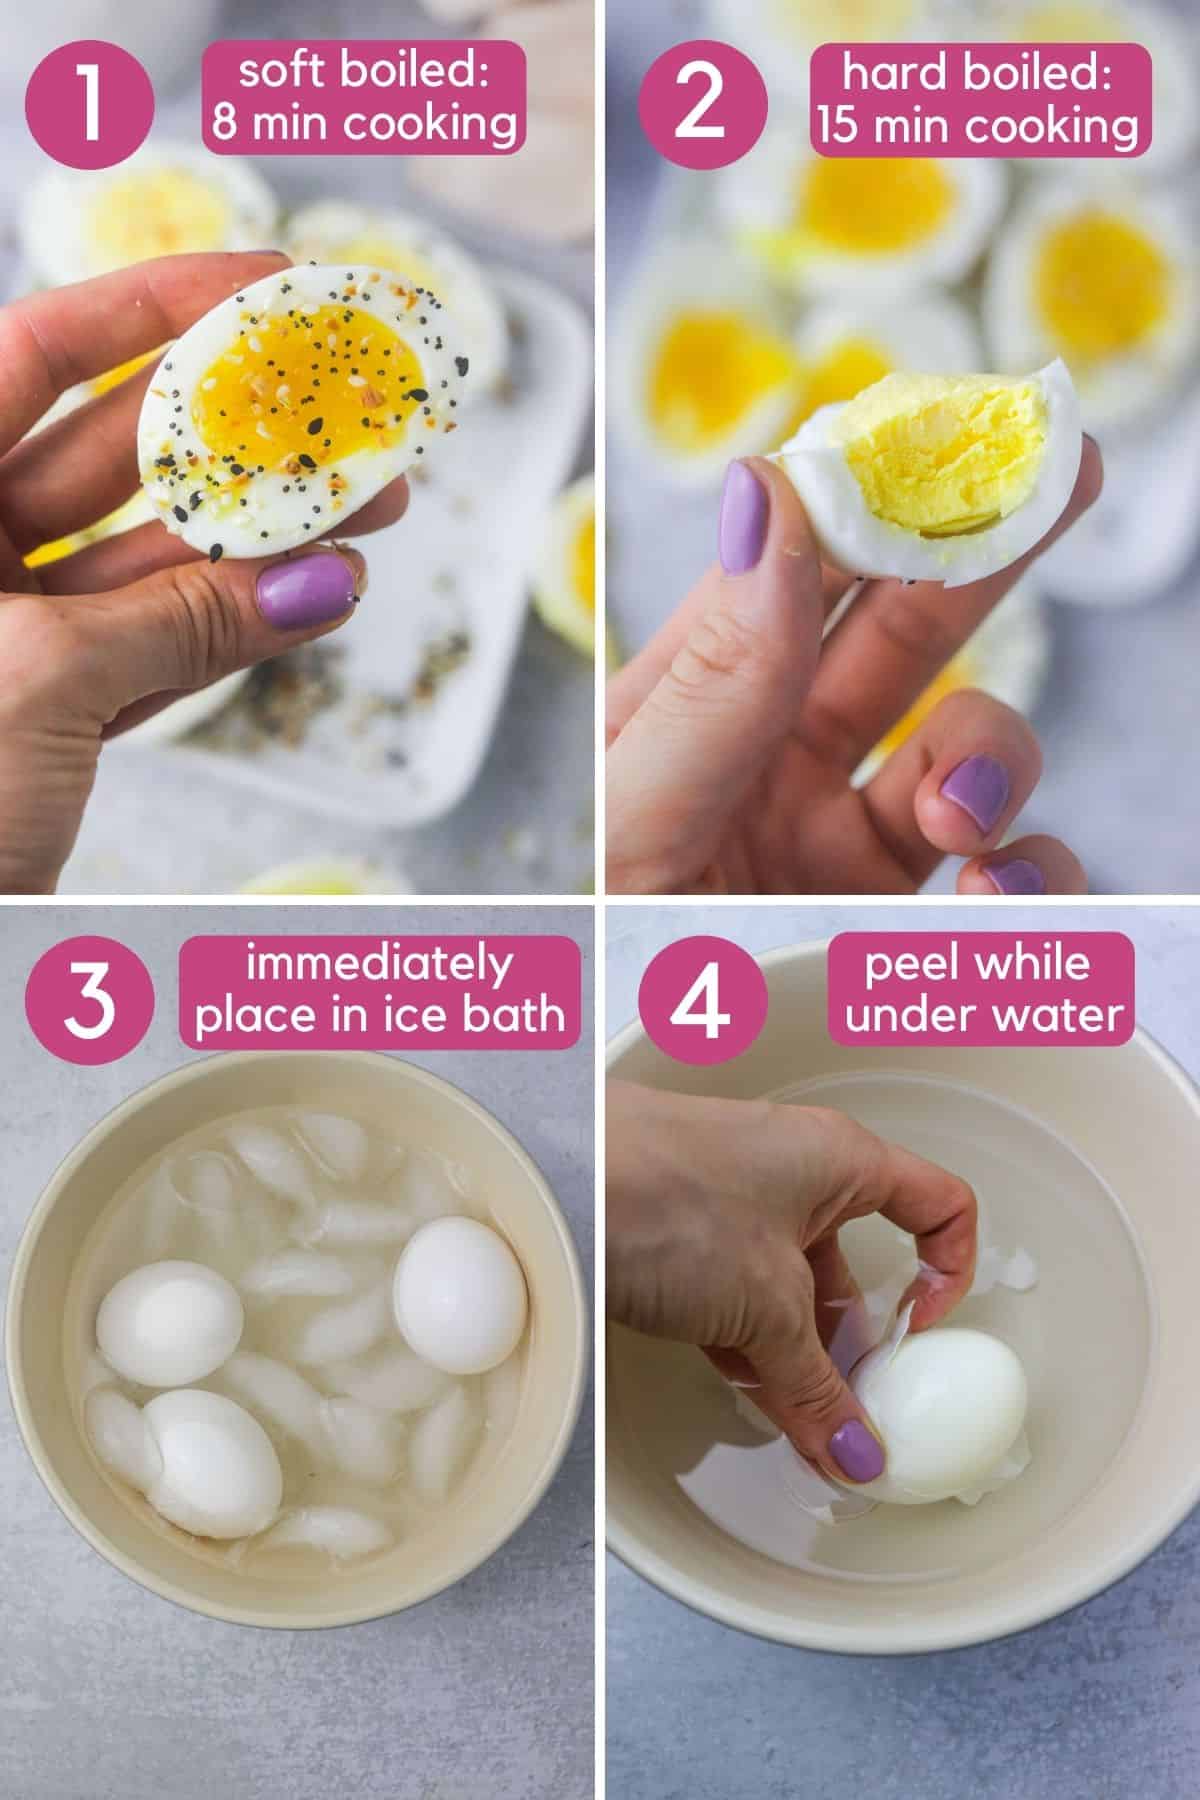 How To Make Air fryer soft and boiled eggs.